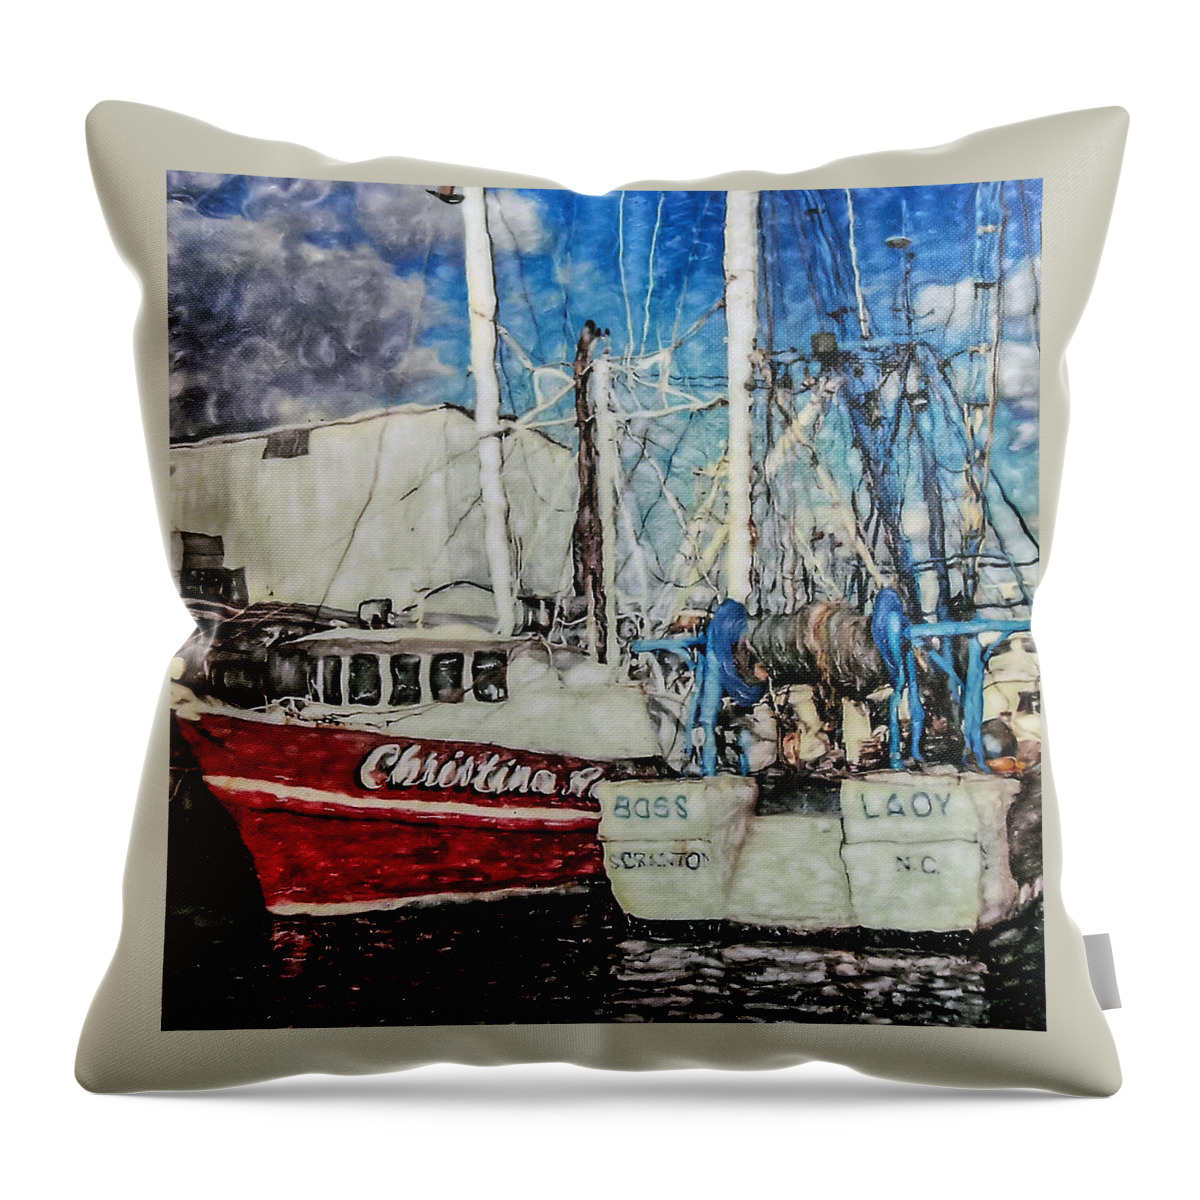 Christina Ann Throw Pillow featuring the photograph Boss Lady by Jerry Gammon